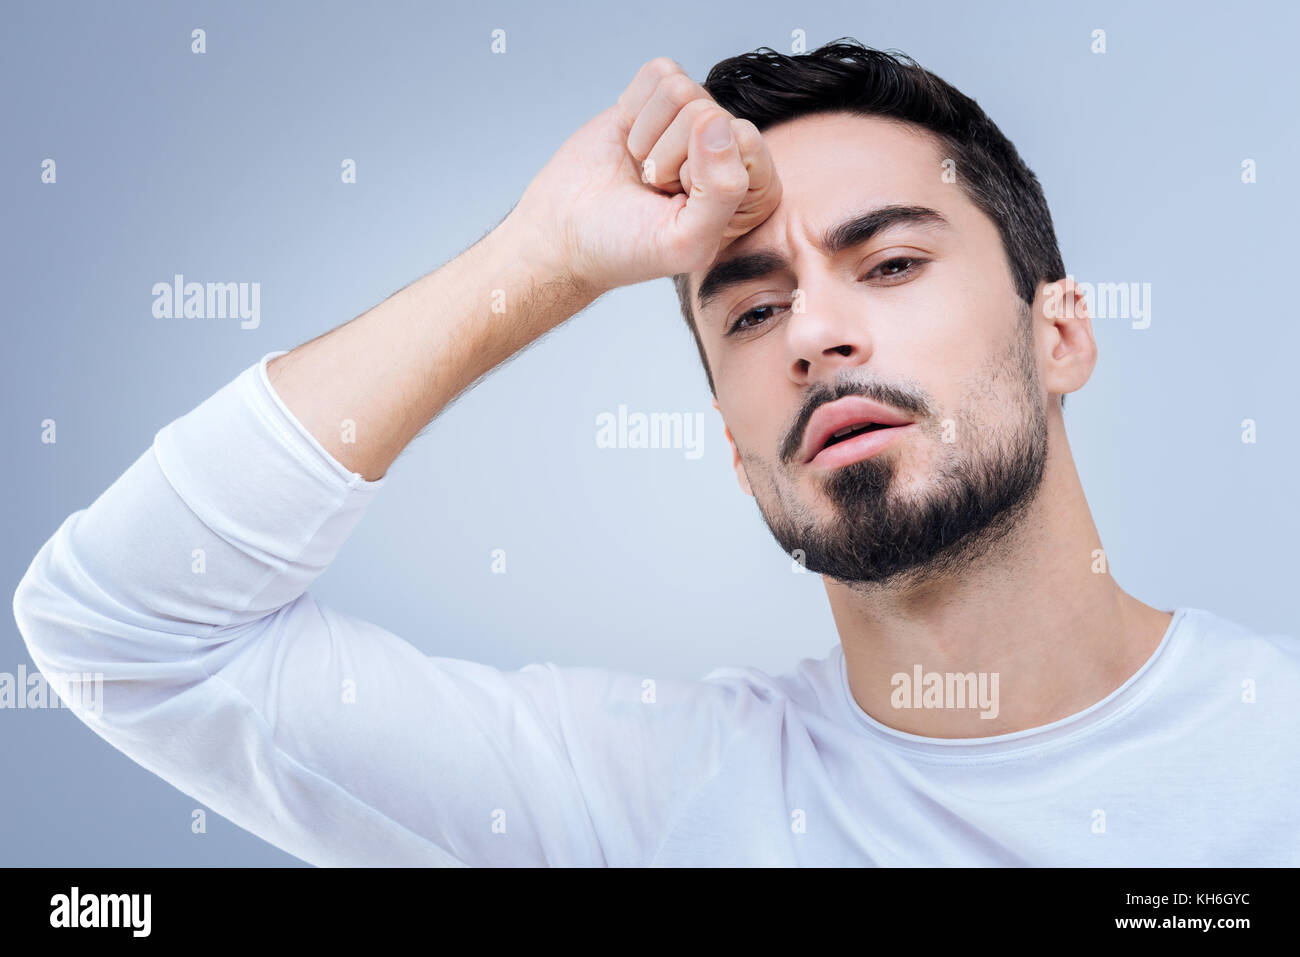 Curious young man thinking about an unusual situation at work Stock Photo